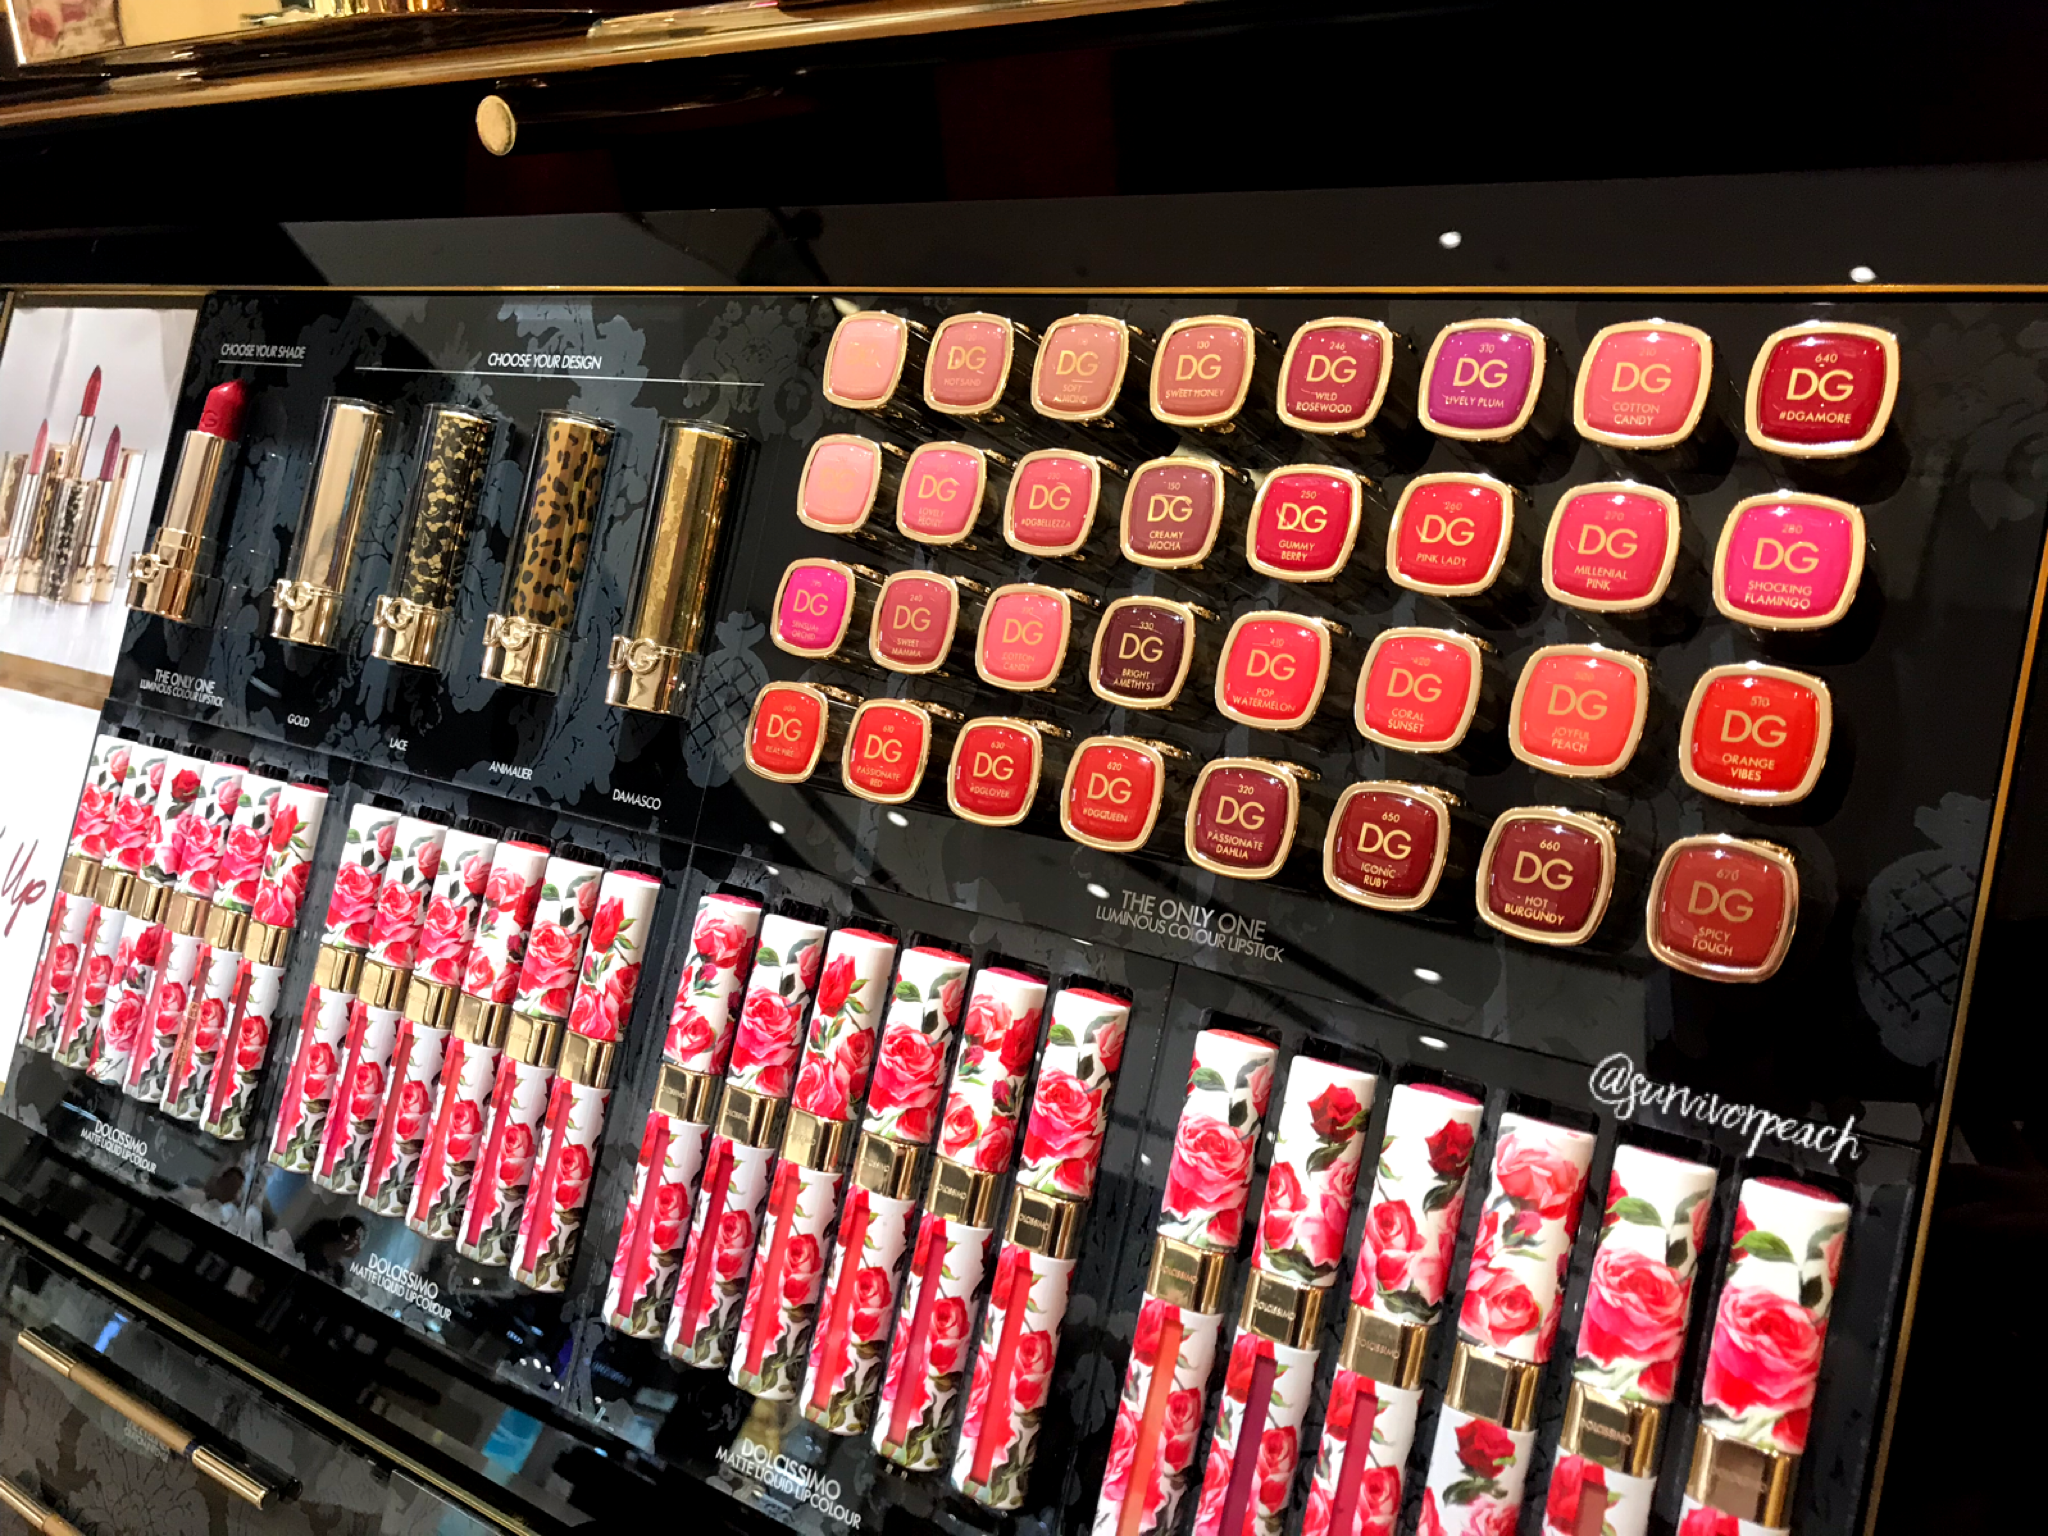 Dolce Gabbana the only one Lipstick Swatches. Lipstick 220 Dolce Gabbana. Dolce Gabbana Lipstick Swatches. Dolce Gabbana the only one помада. Dolce gabbana помада the only one